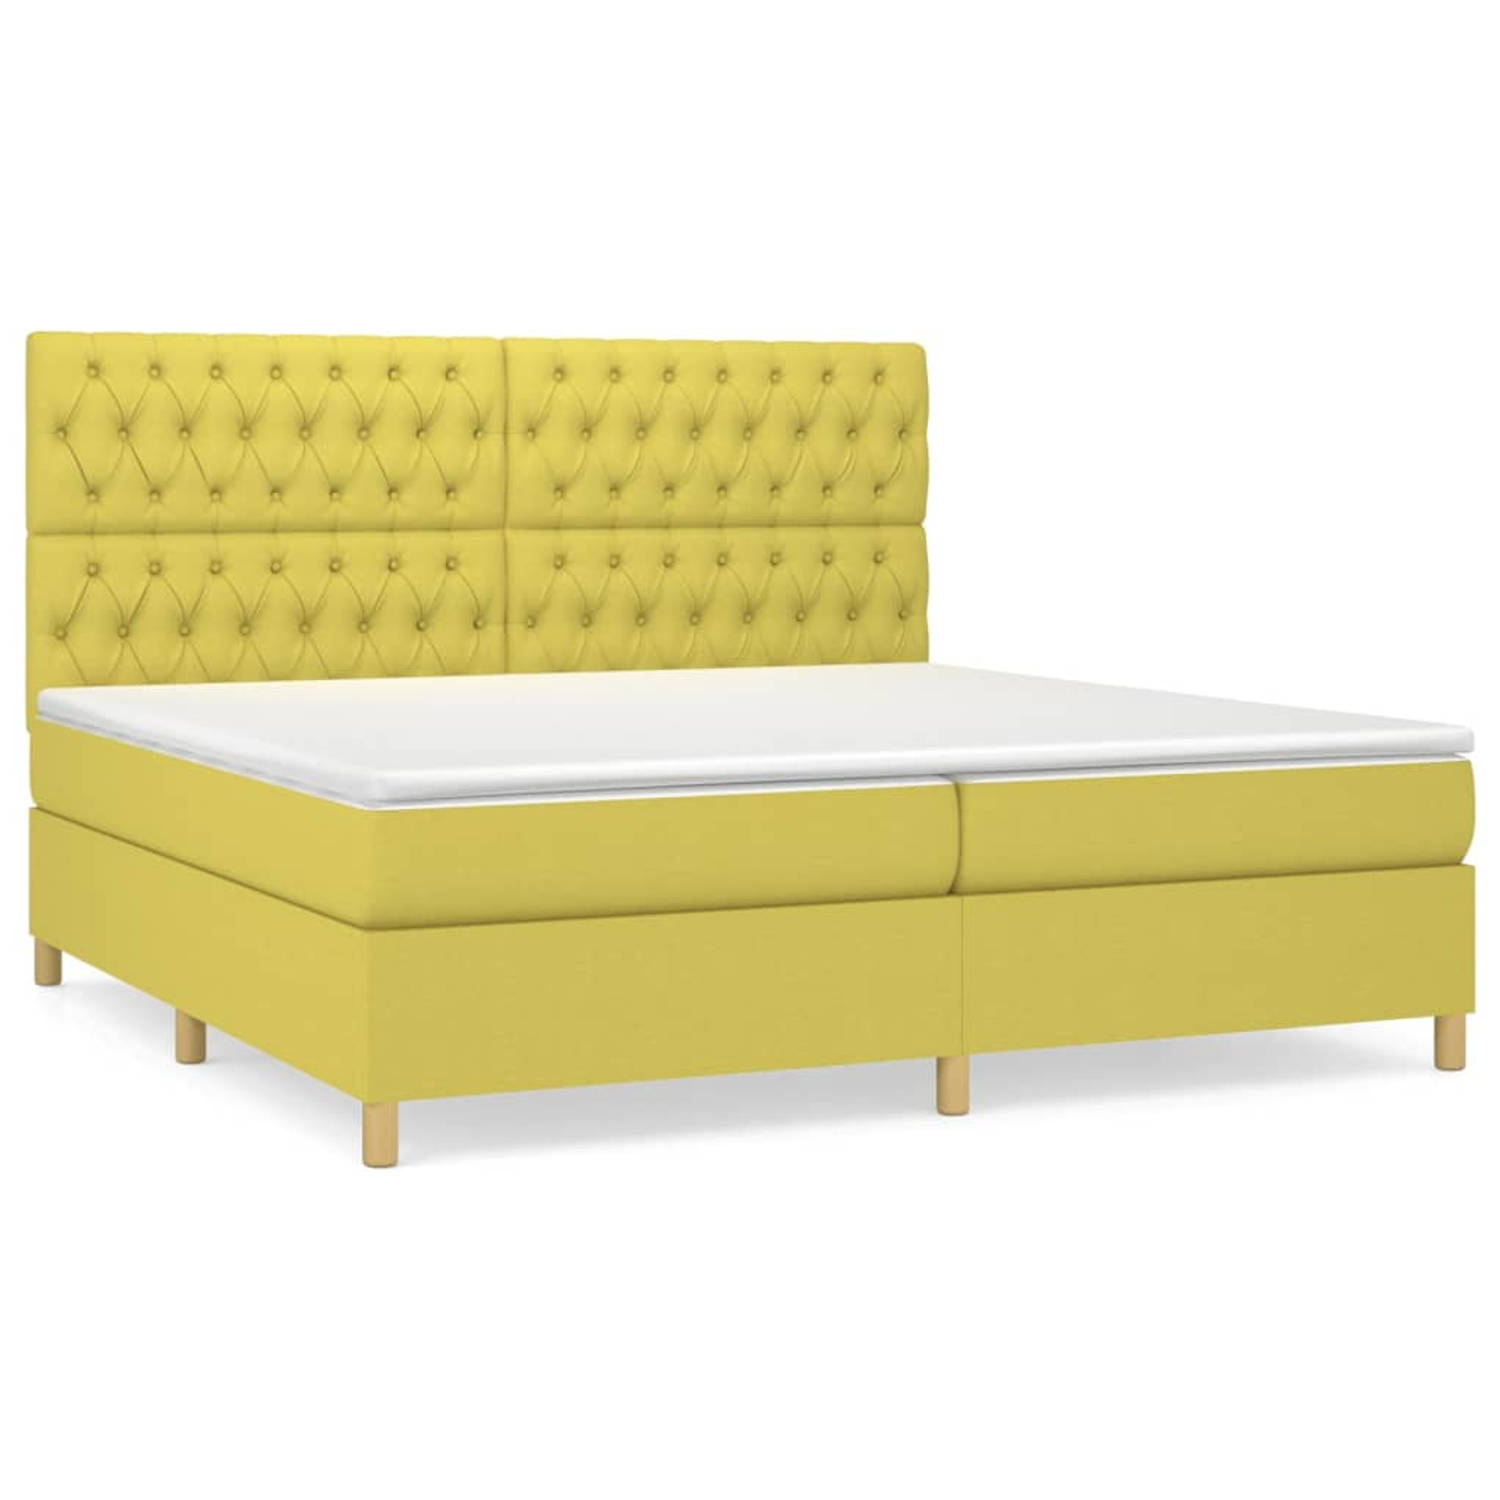 The Living Store Boxspringbed - Comfort - Bed - 203 x 200 x 118/128 cm - Groen